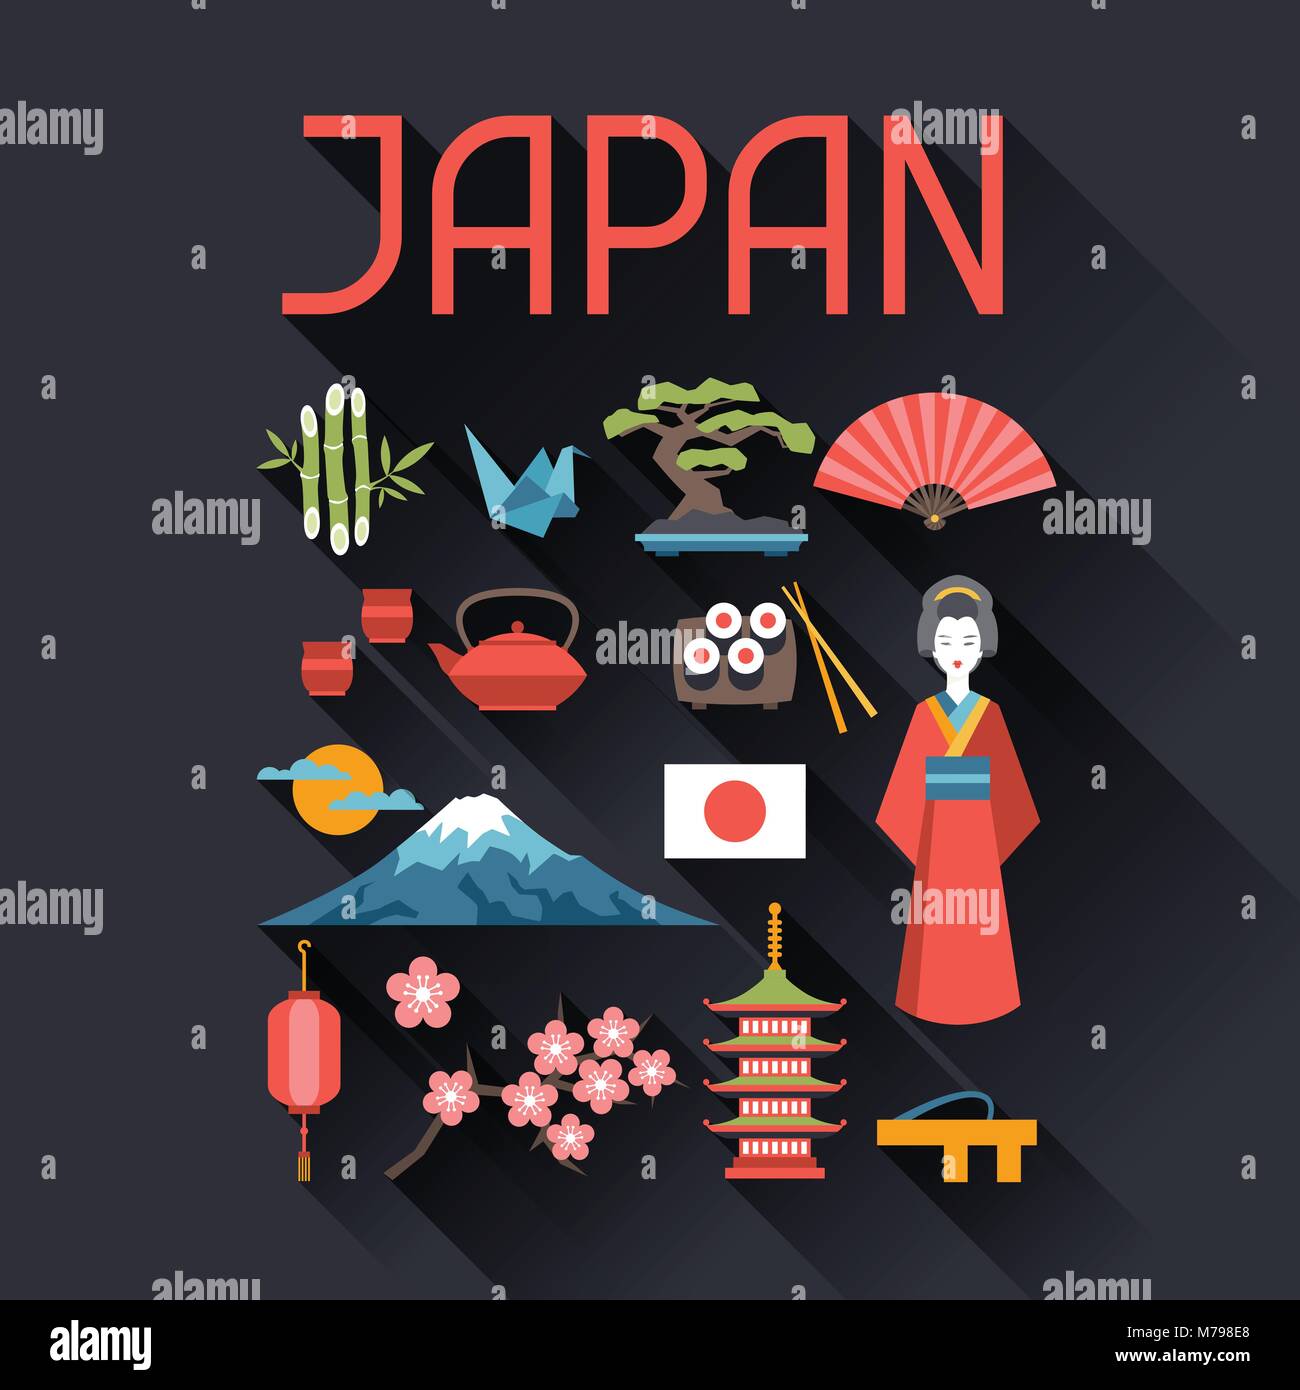 Japan icons and symbols set. Stock Vector